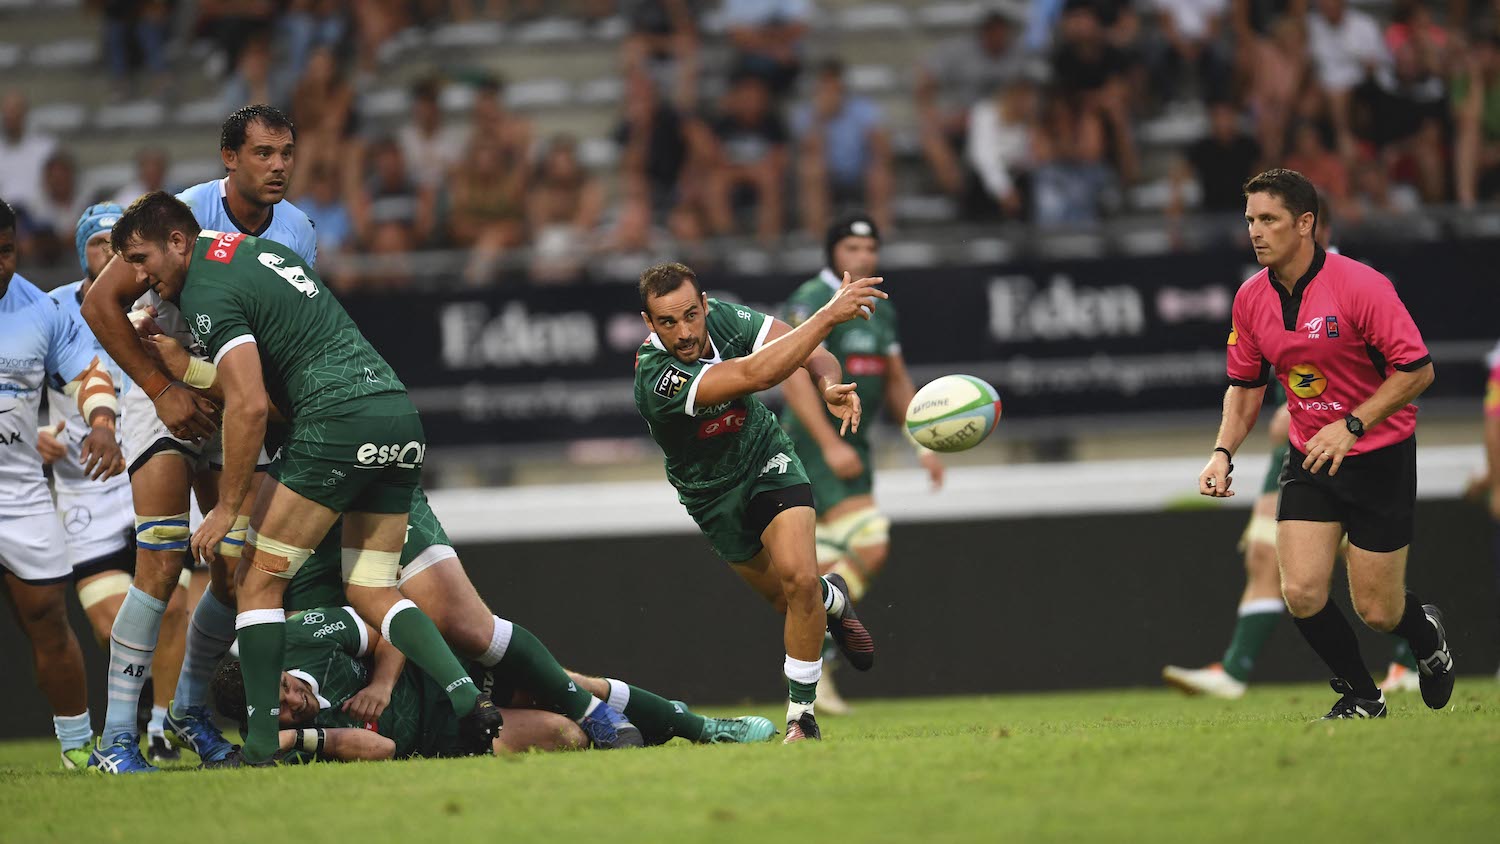 TOP 14 | SECTION PALOISE - CASTRES OLYMPIQUE  : 37 - 24